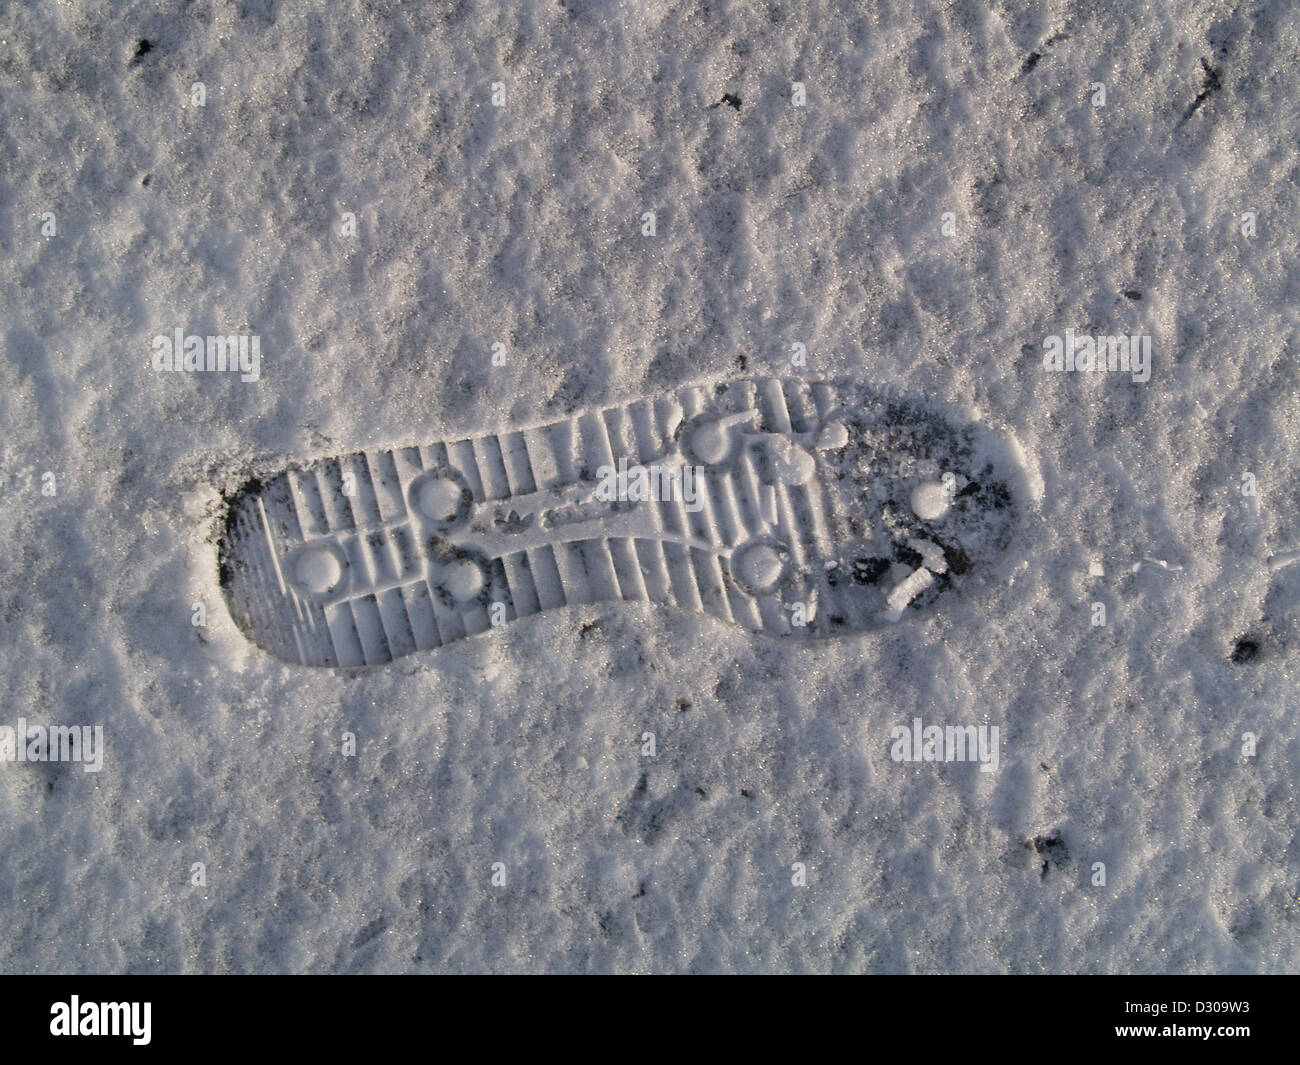 Footprint in the snow, Cromarty, Scotland Stock Photo